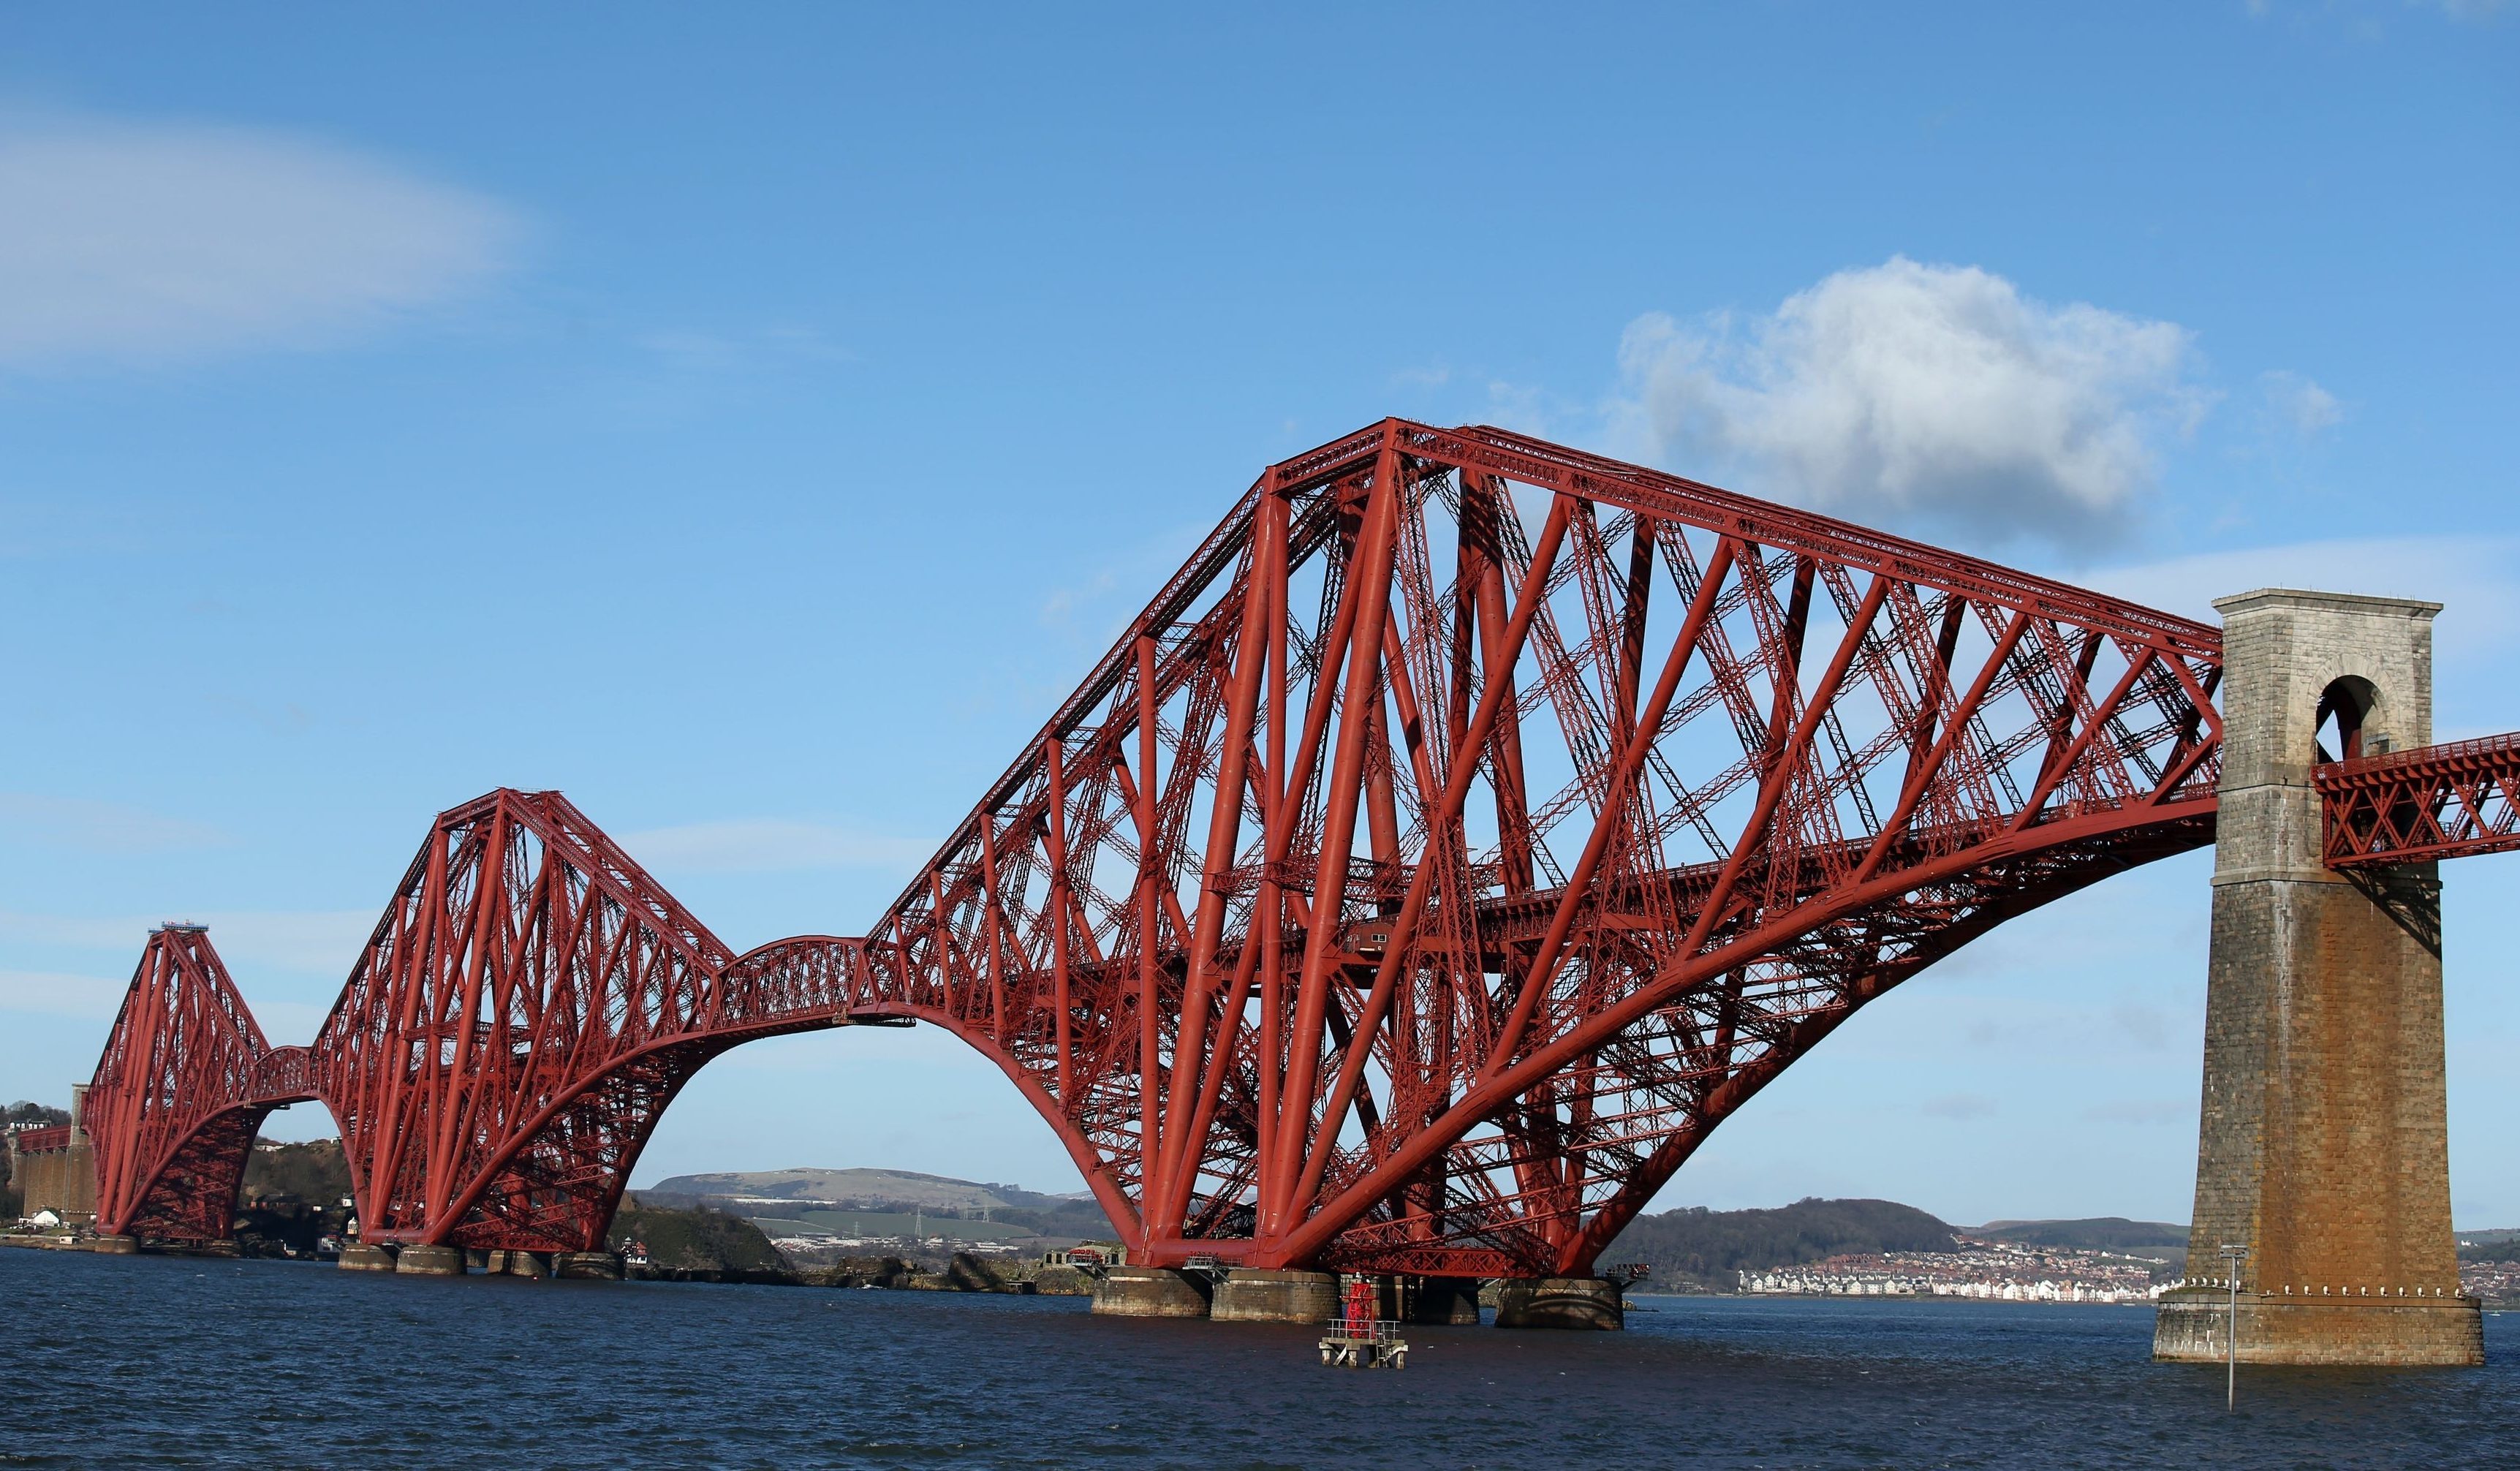 A person was on the line on the Forth Bridge